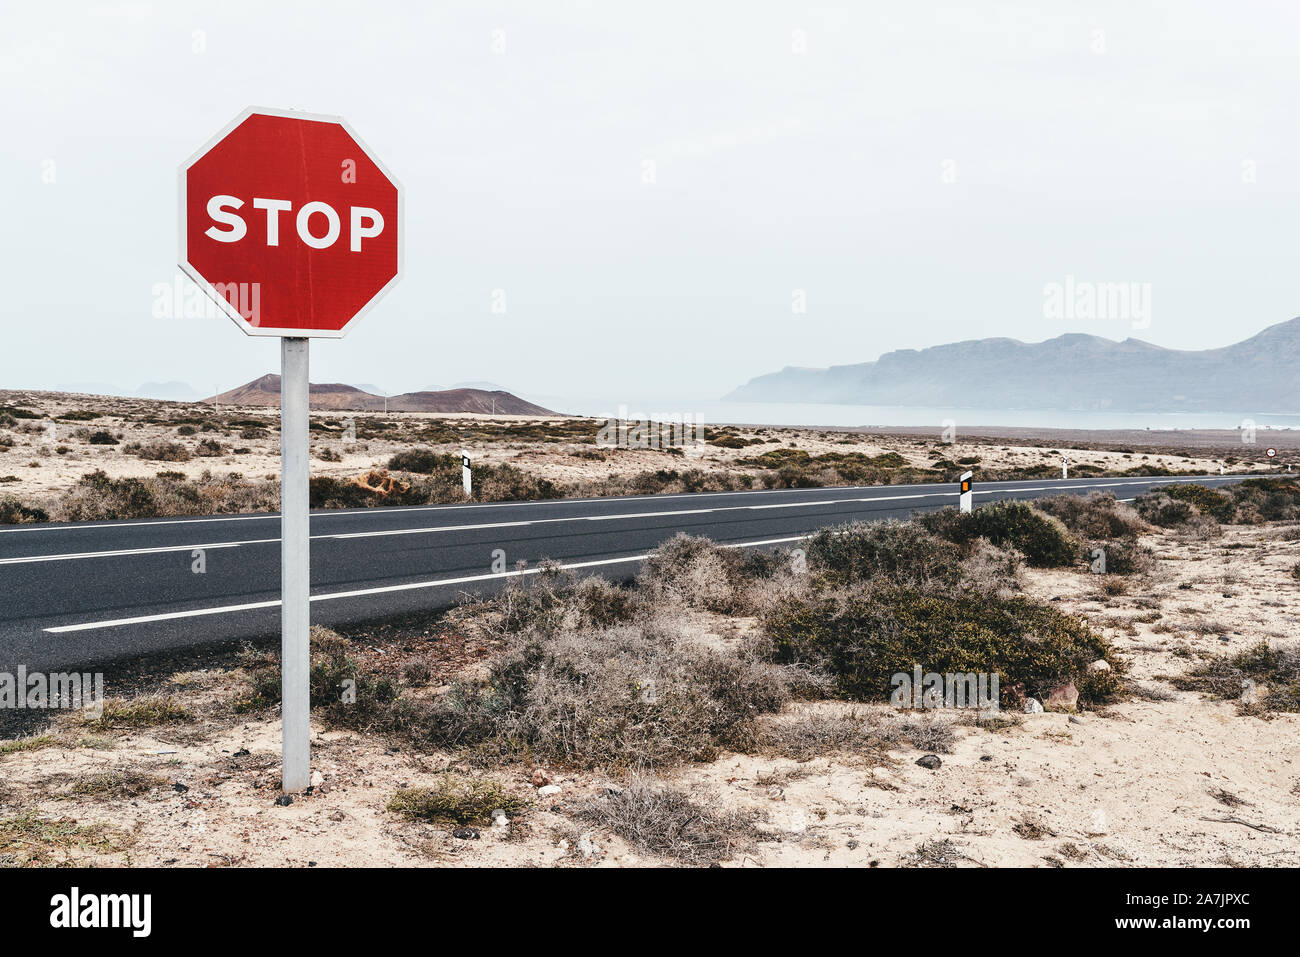 stop sign at edge of road through arid landscape on Lanzarote, Canary Islands Stock Photo